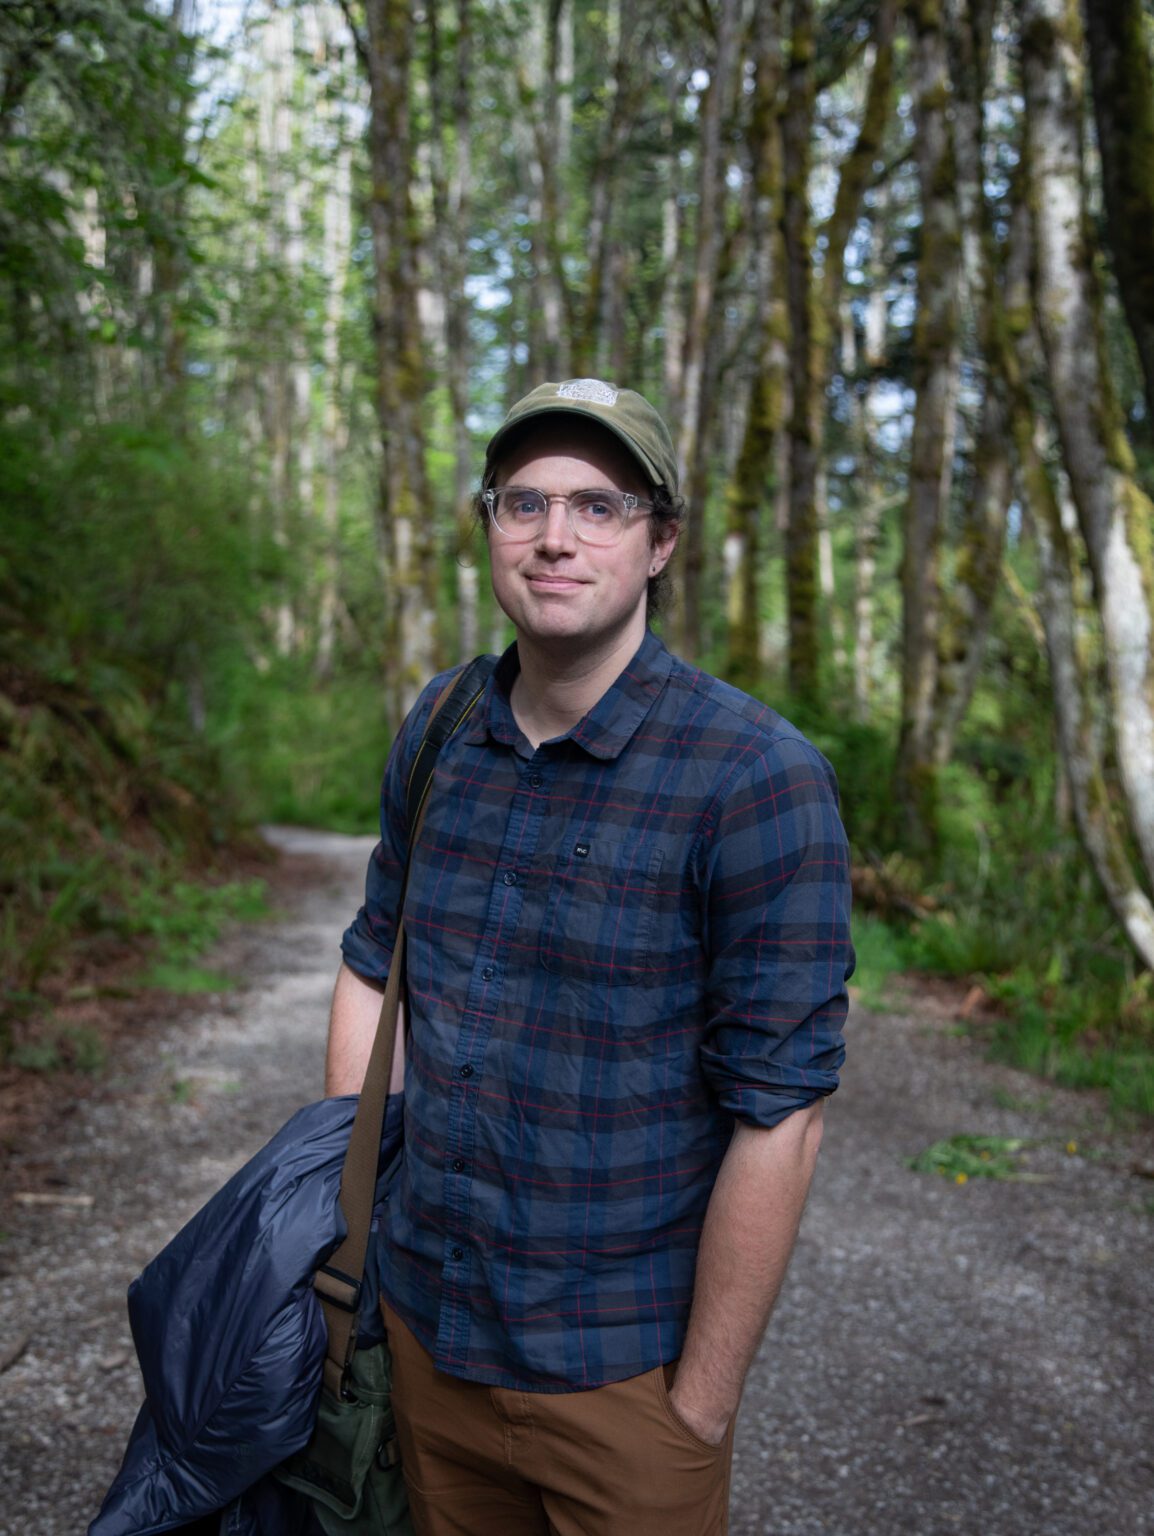 Luke Hollister is the photographer for Western Washington University. He moved to Bellingham about a year ago to "live somewhere that I wanted to live